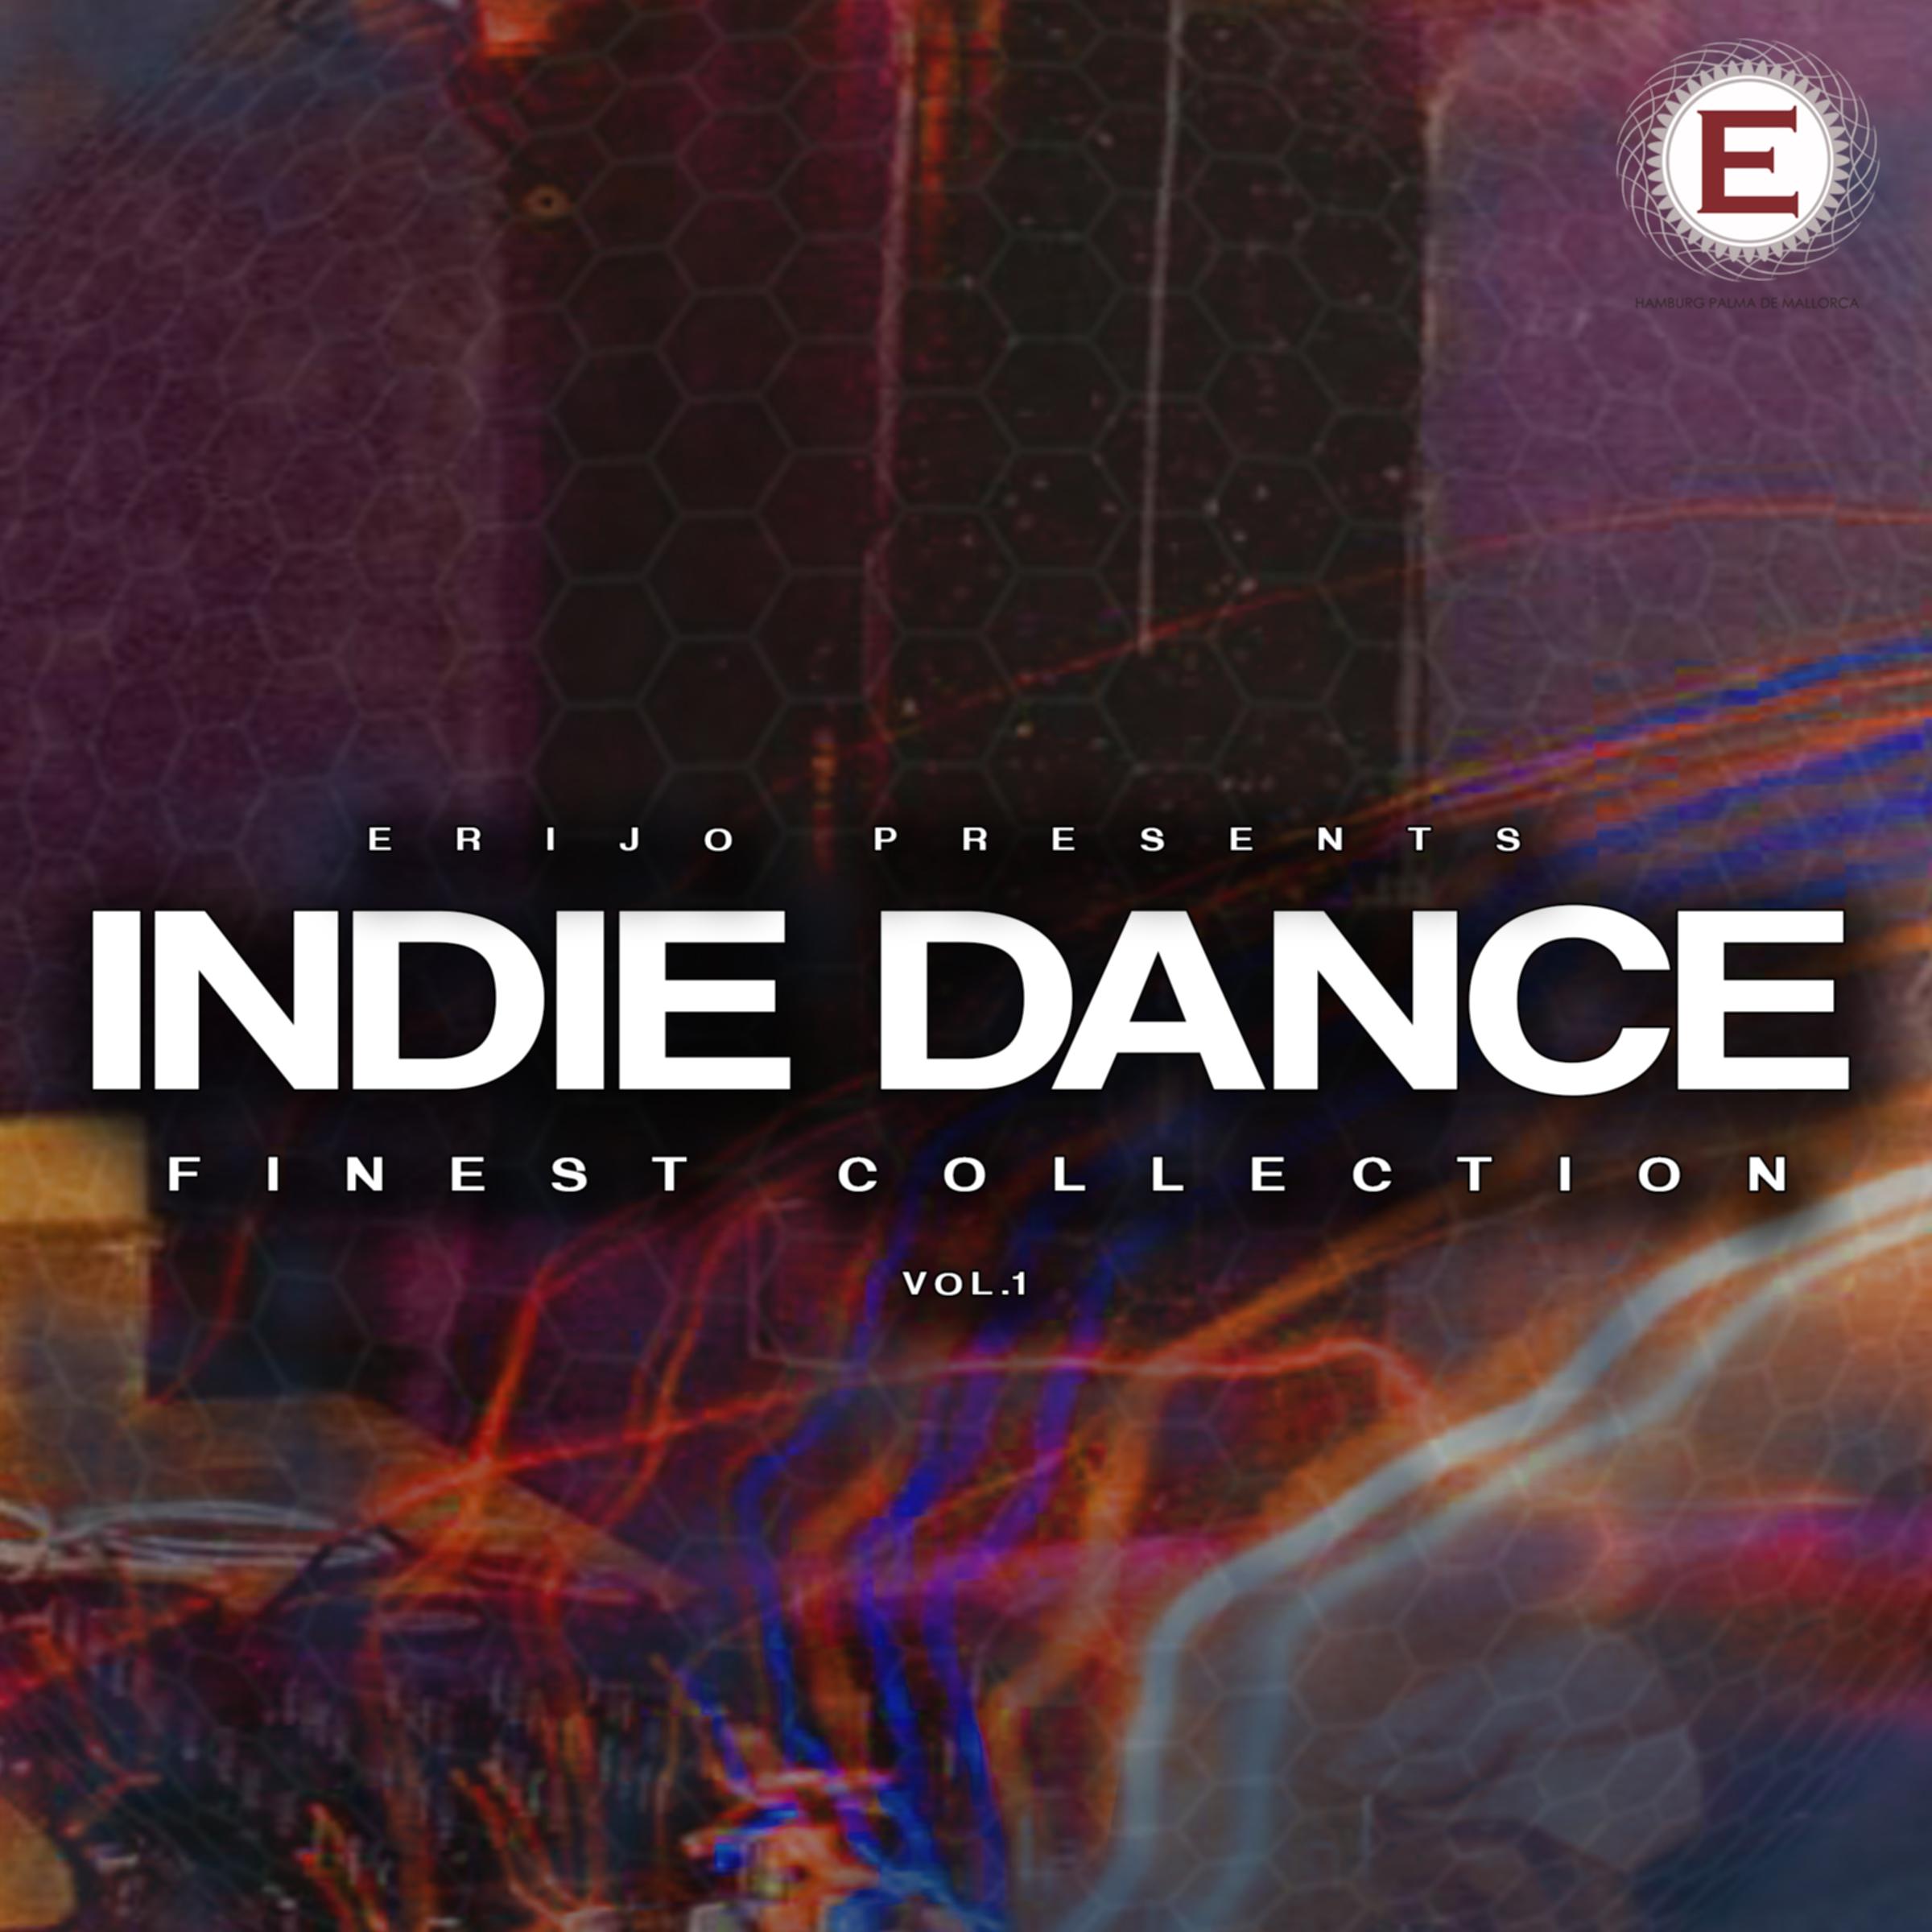 Indie Dance - Finest Collection, Vol. 1